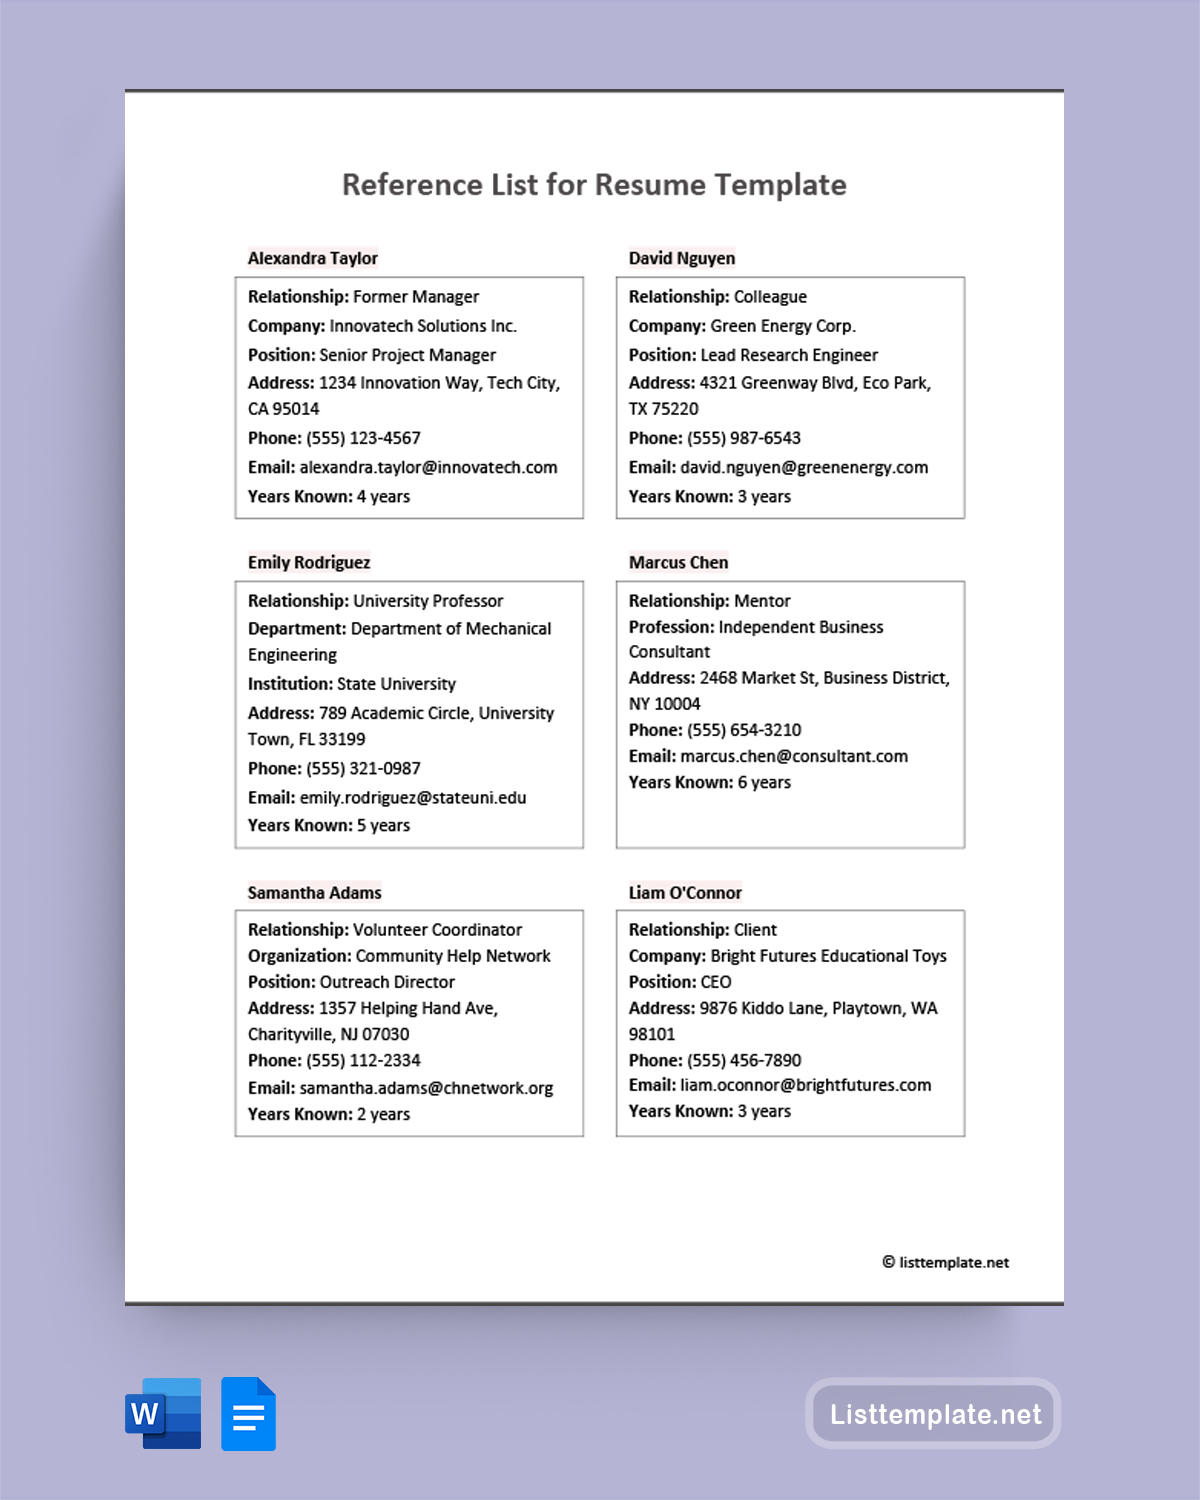 Reference List for Resume Template - Word, Google Docs